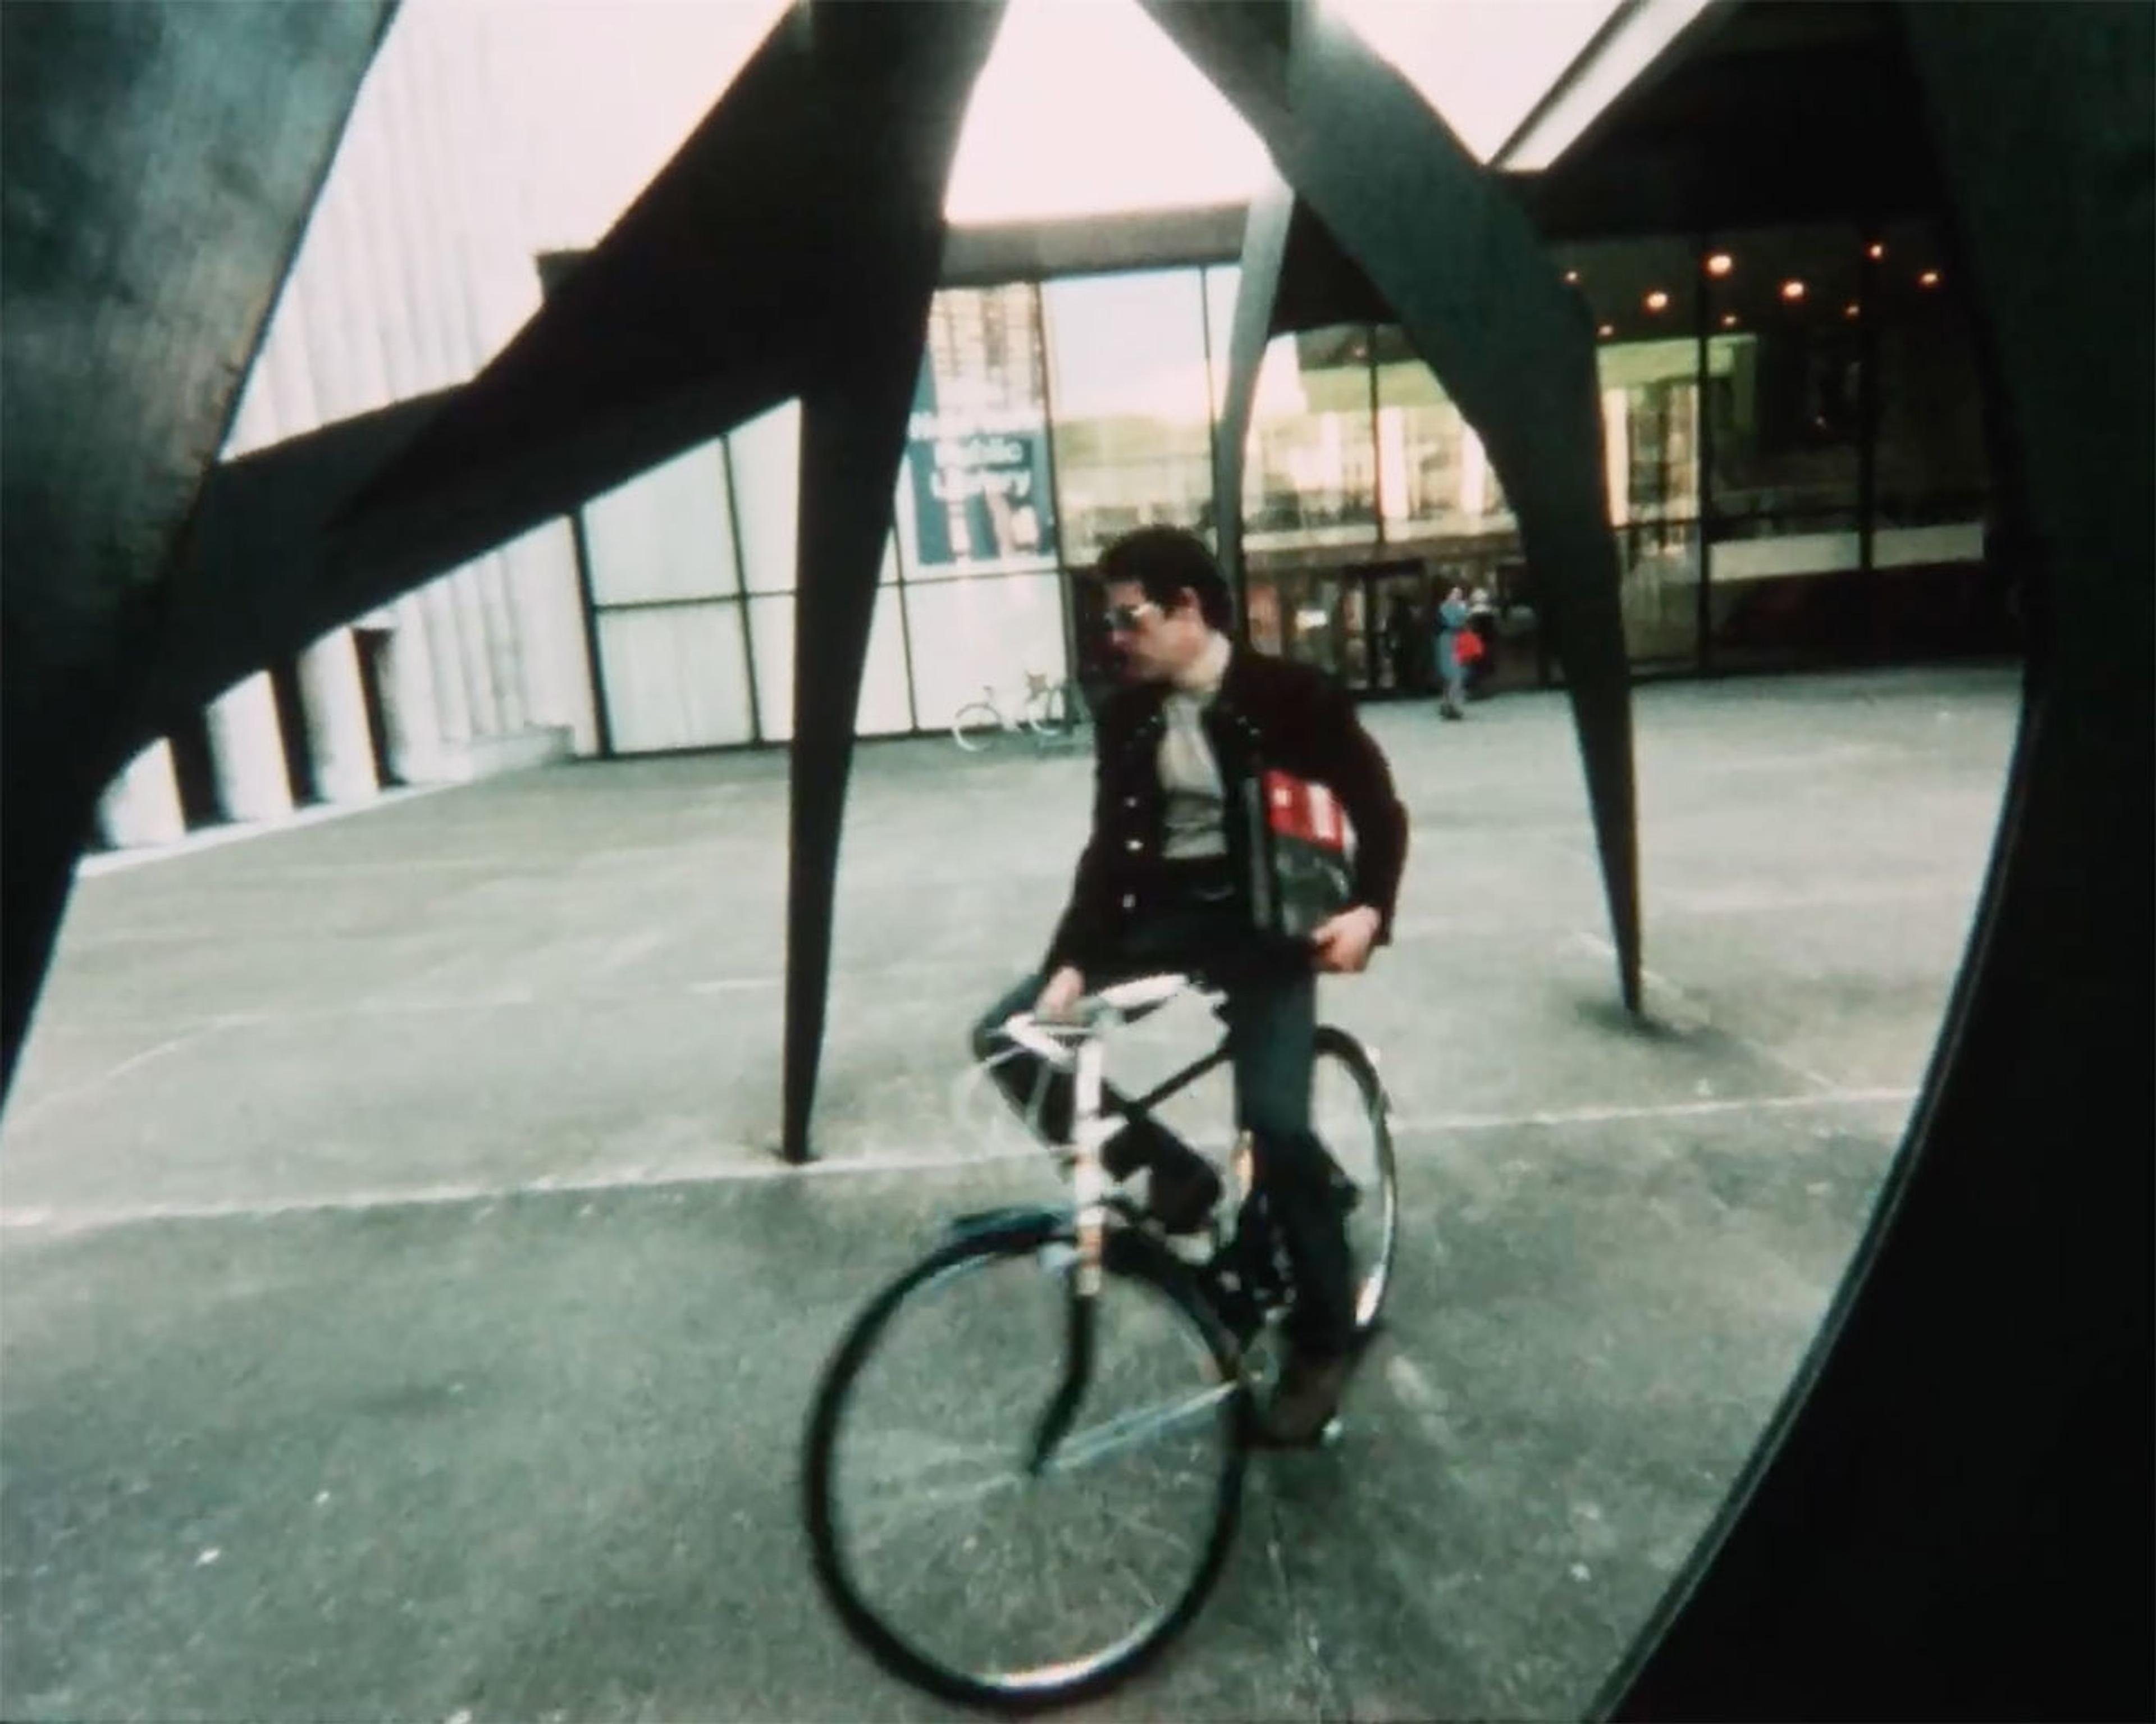 A photo of a man riding his bike in a city underneath a steel sculpture